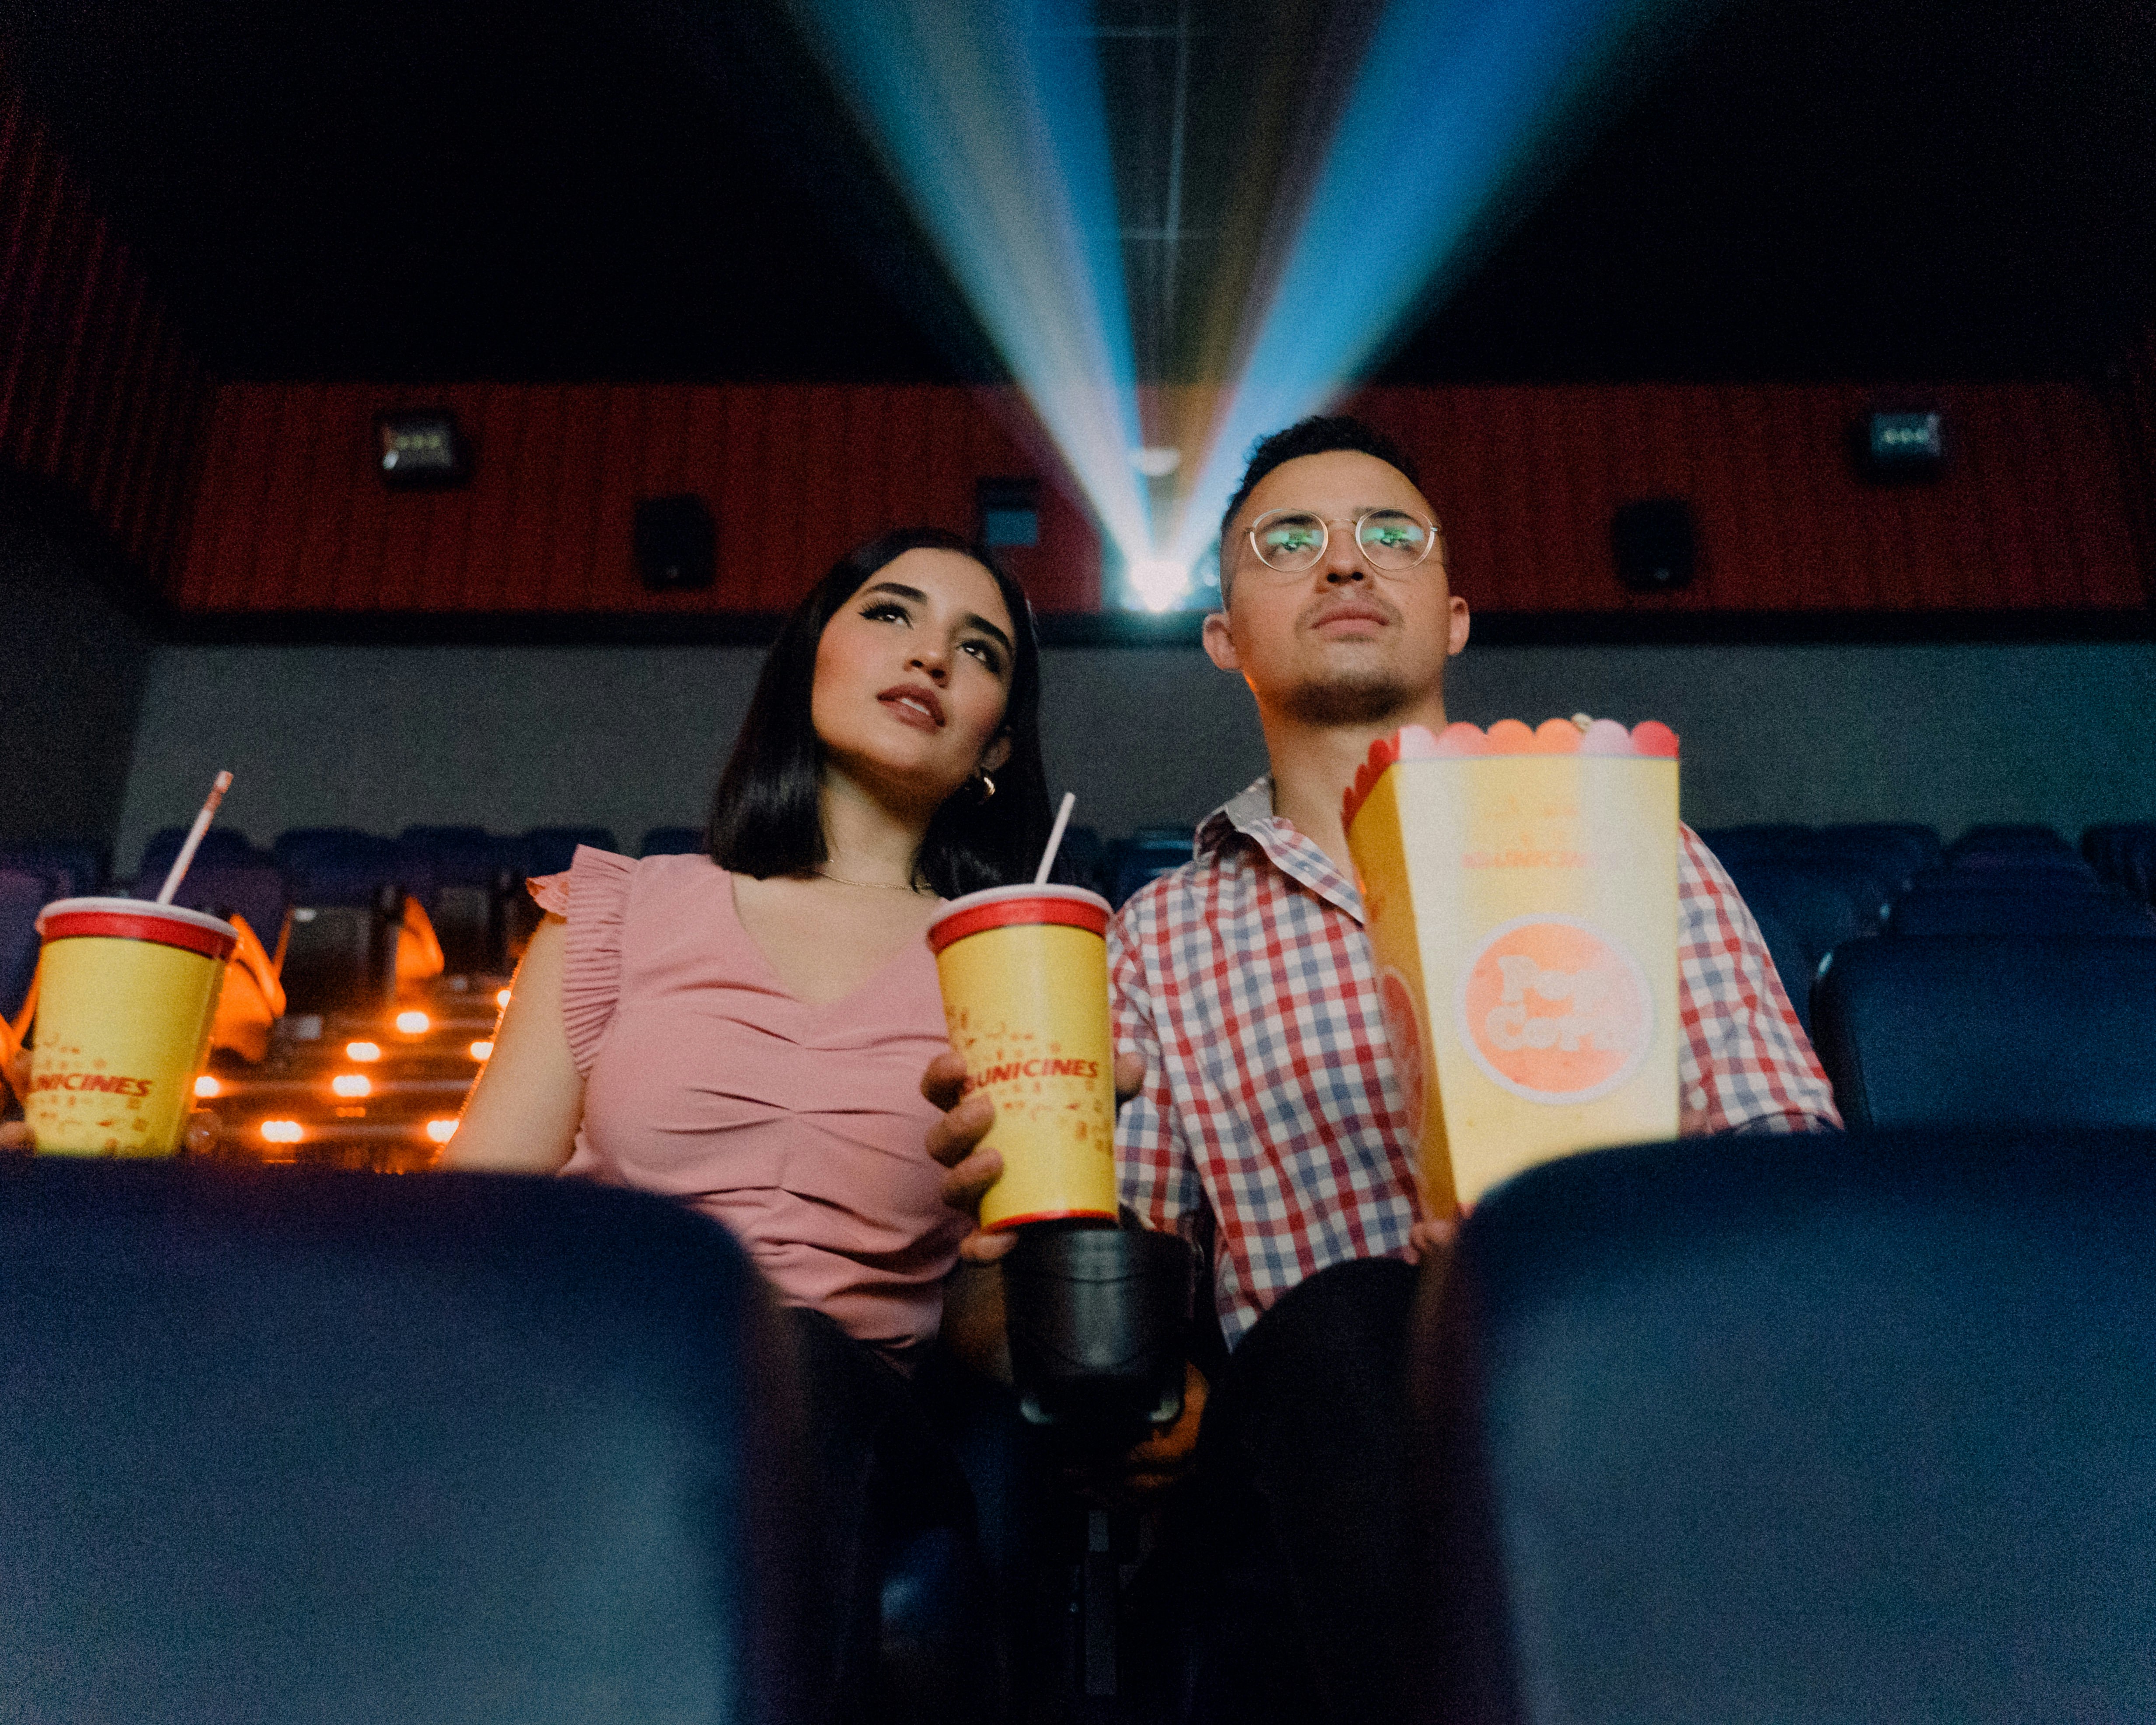 A couple sitting in a movie theatre holding drinks and popcorn.